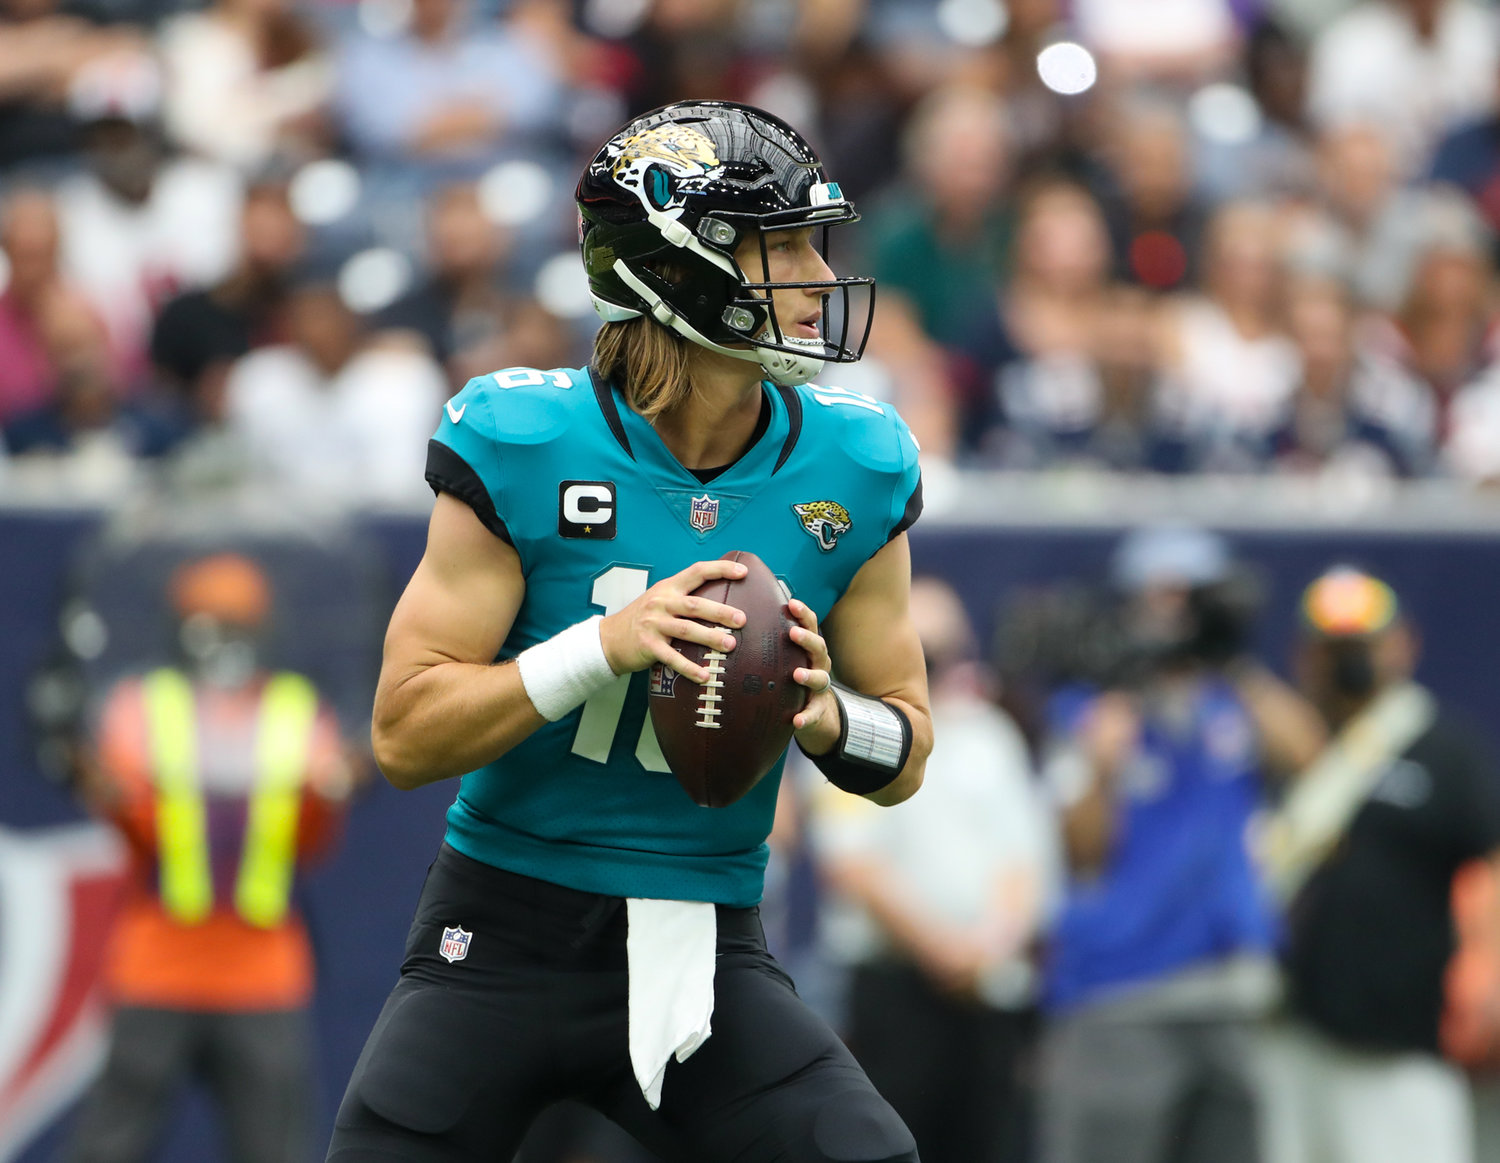 Jacksonville Jaguars quarterback Trevor Lawrence (16) looks to pass during the first half of an NFL game between the Houston Texans and the Jacksonville Jaguars on September 12, 2021 in Houston, Texas.